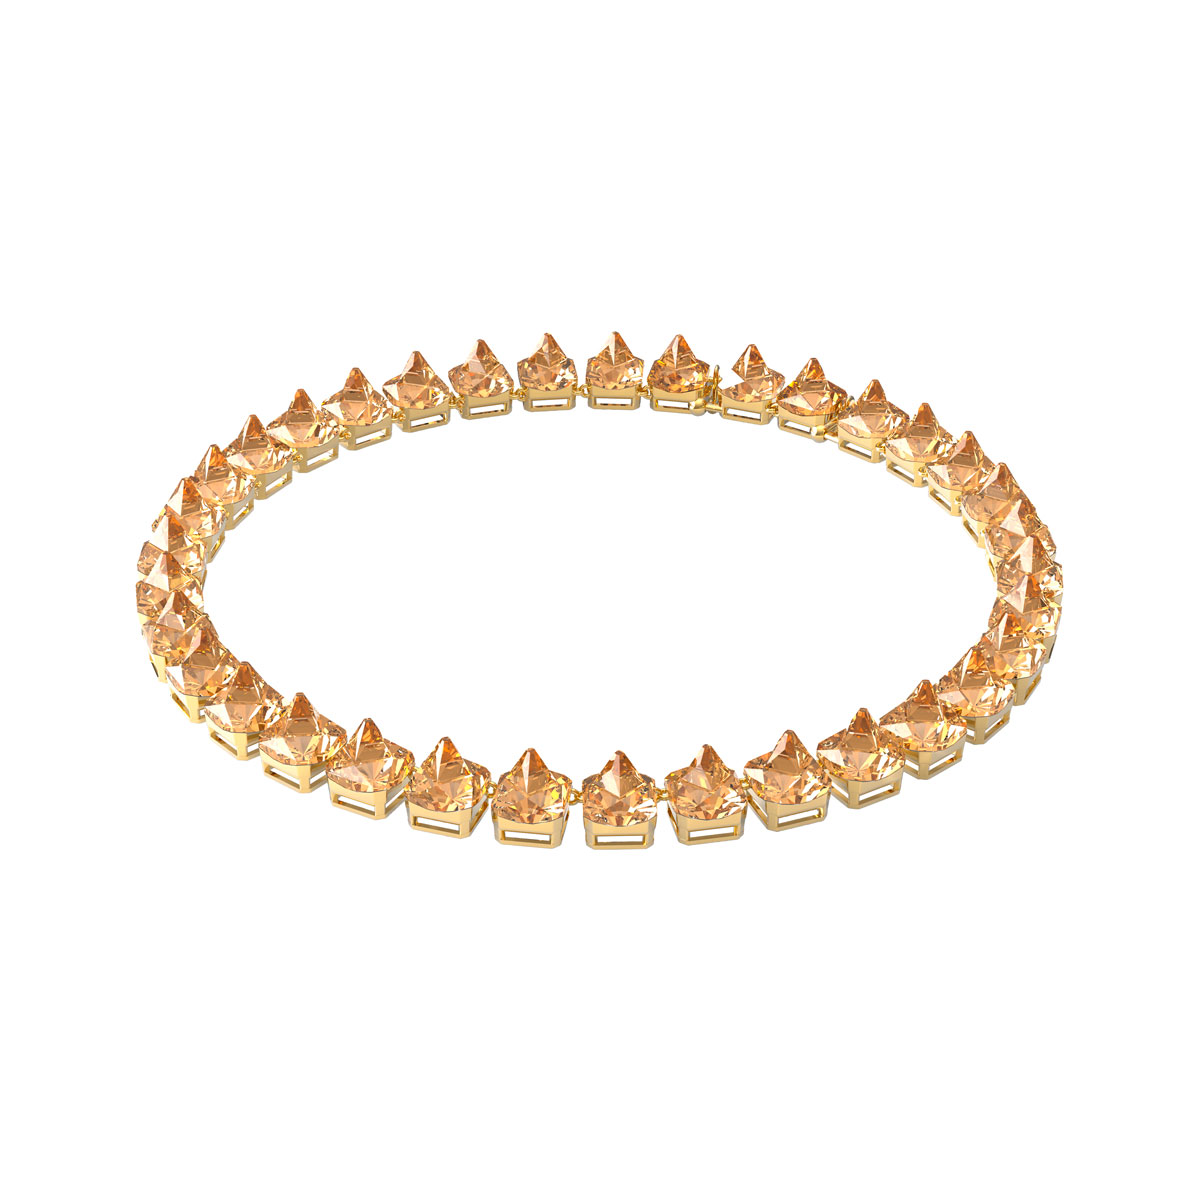 Swarovski Chroma Necklace, Spike Crystals, Yellow, Gold-Tone Plated